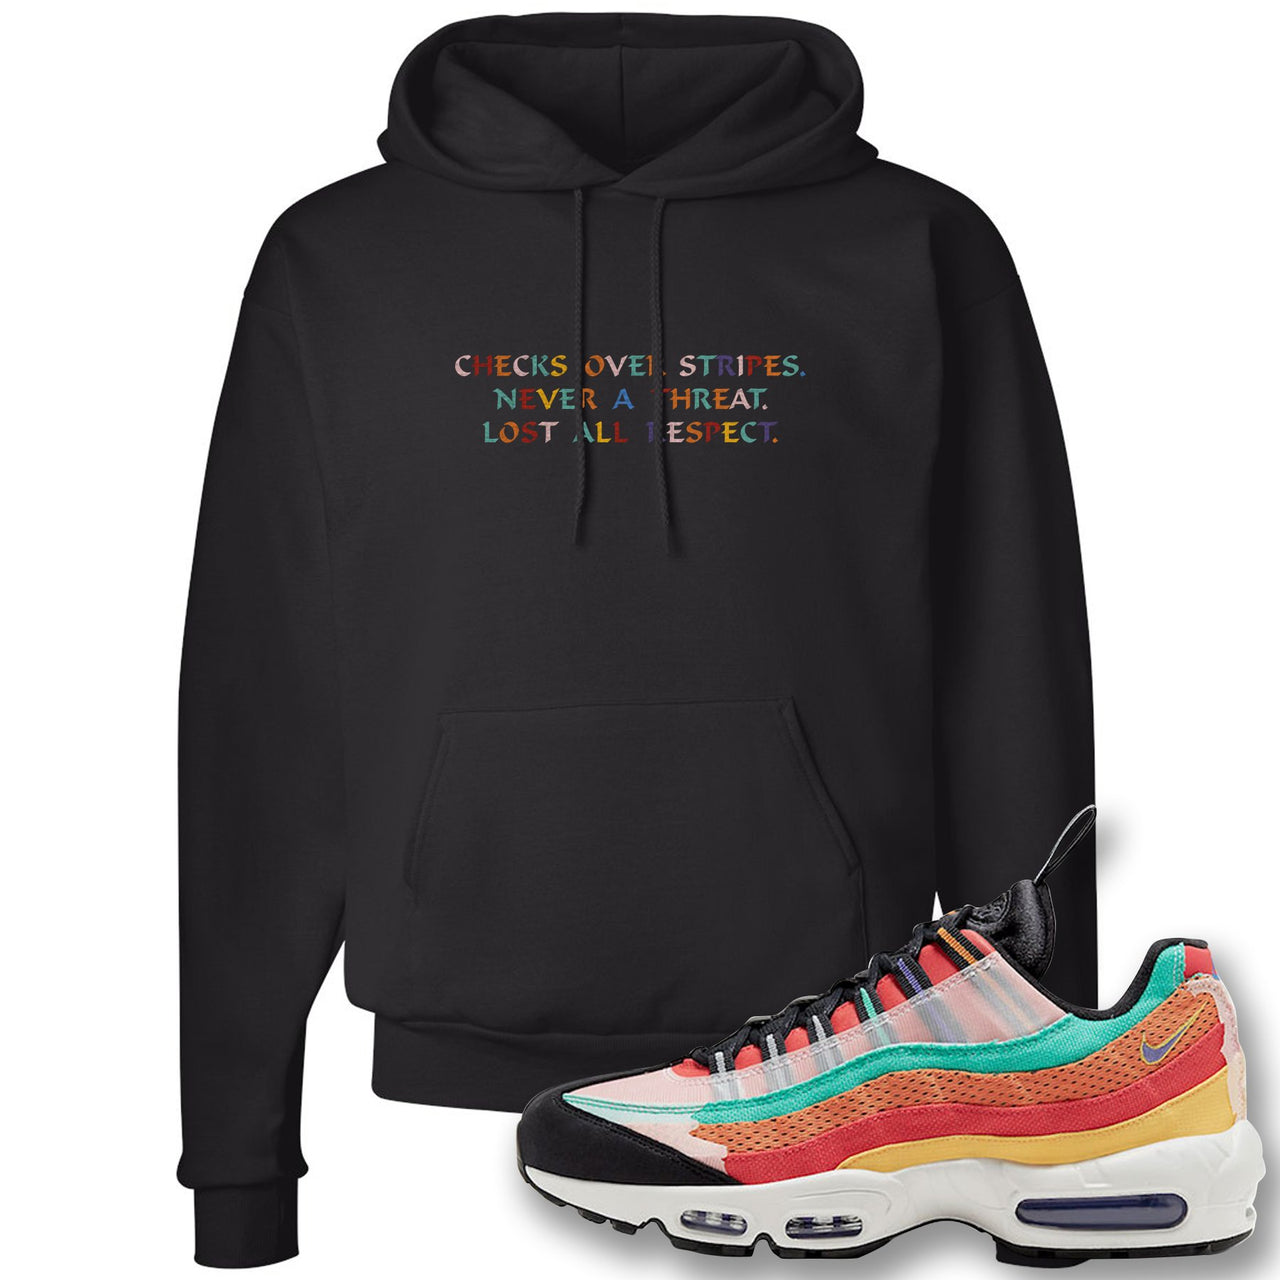 Air Max 95 Black History Month Sneaker Black Pullover Hoodie | Crewneck to match Nike Air Max 95 Black History Month Shoes | Checks Over Stripes